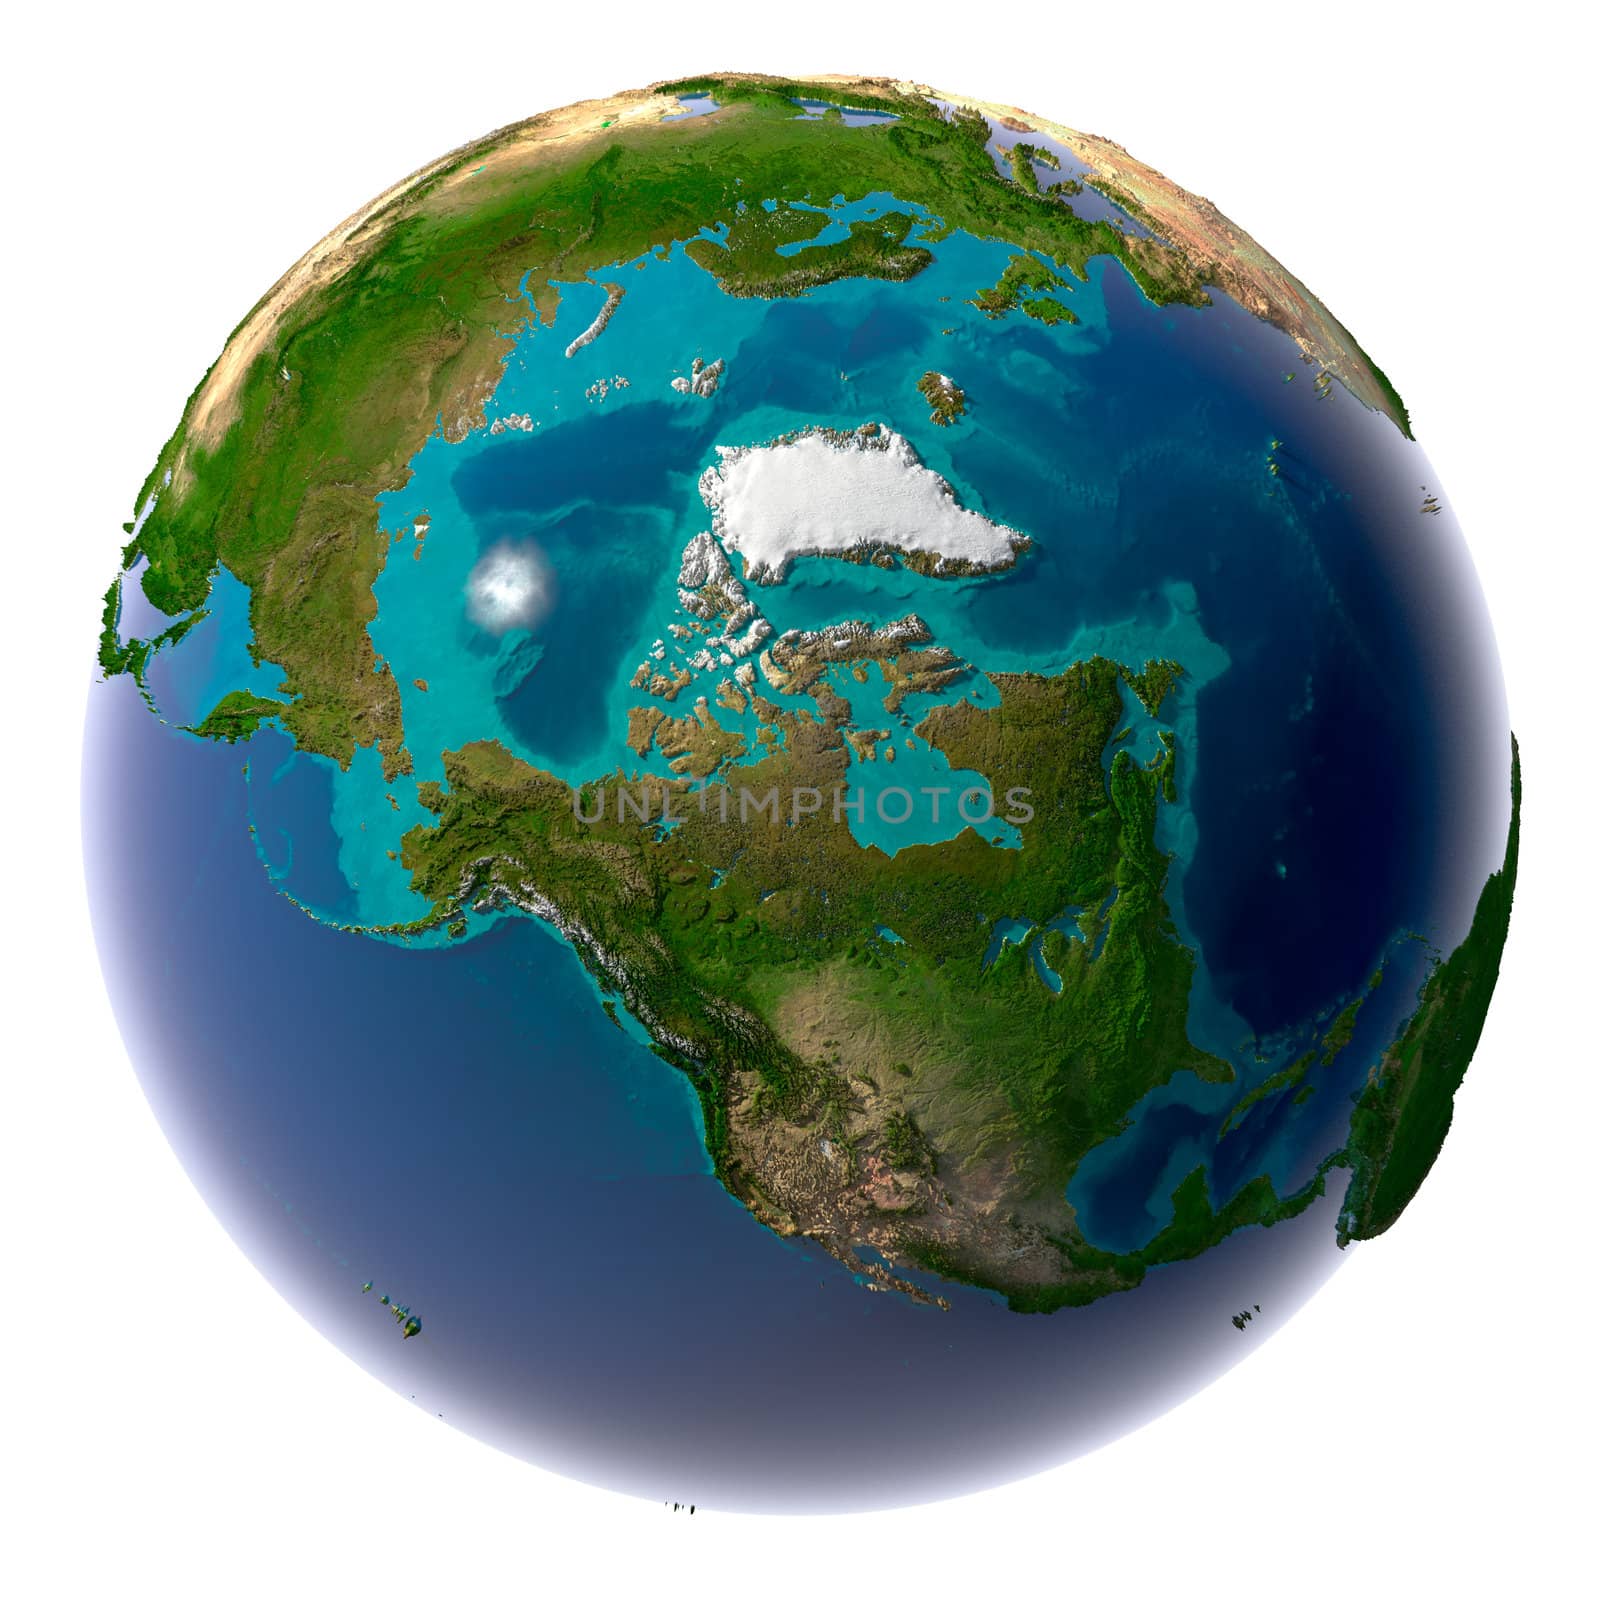 Earth with translucent water in the oceans and the detailed topography of the continents